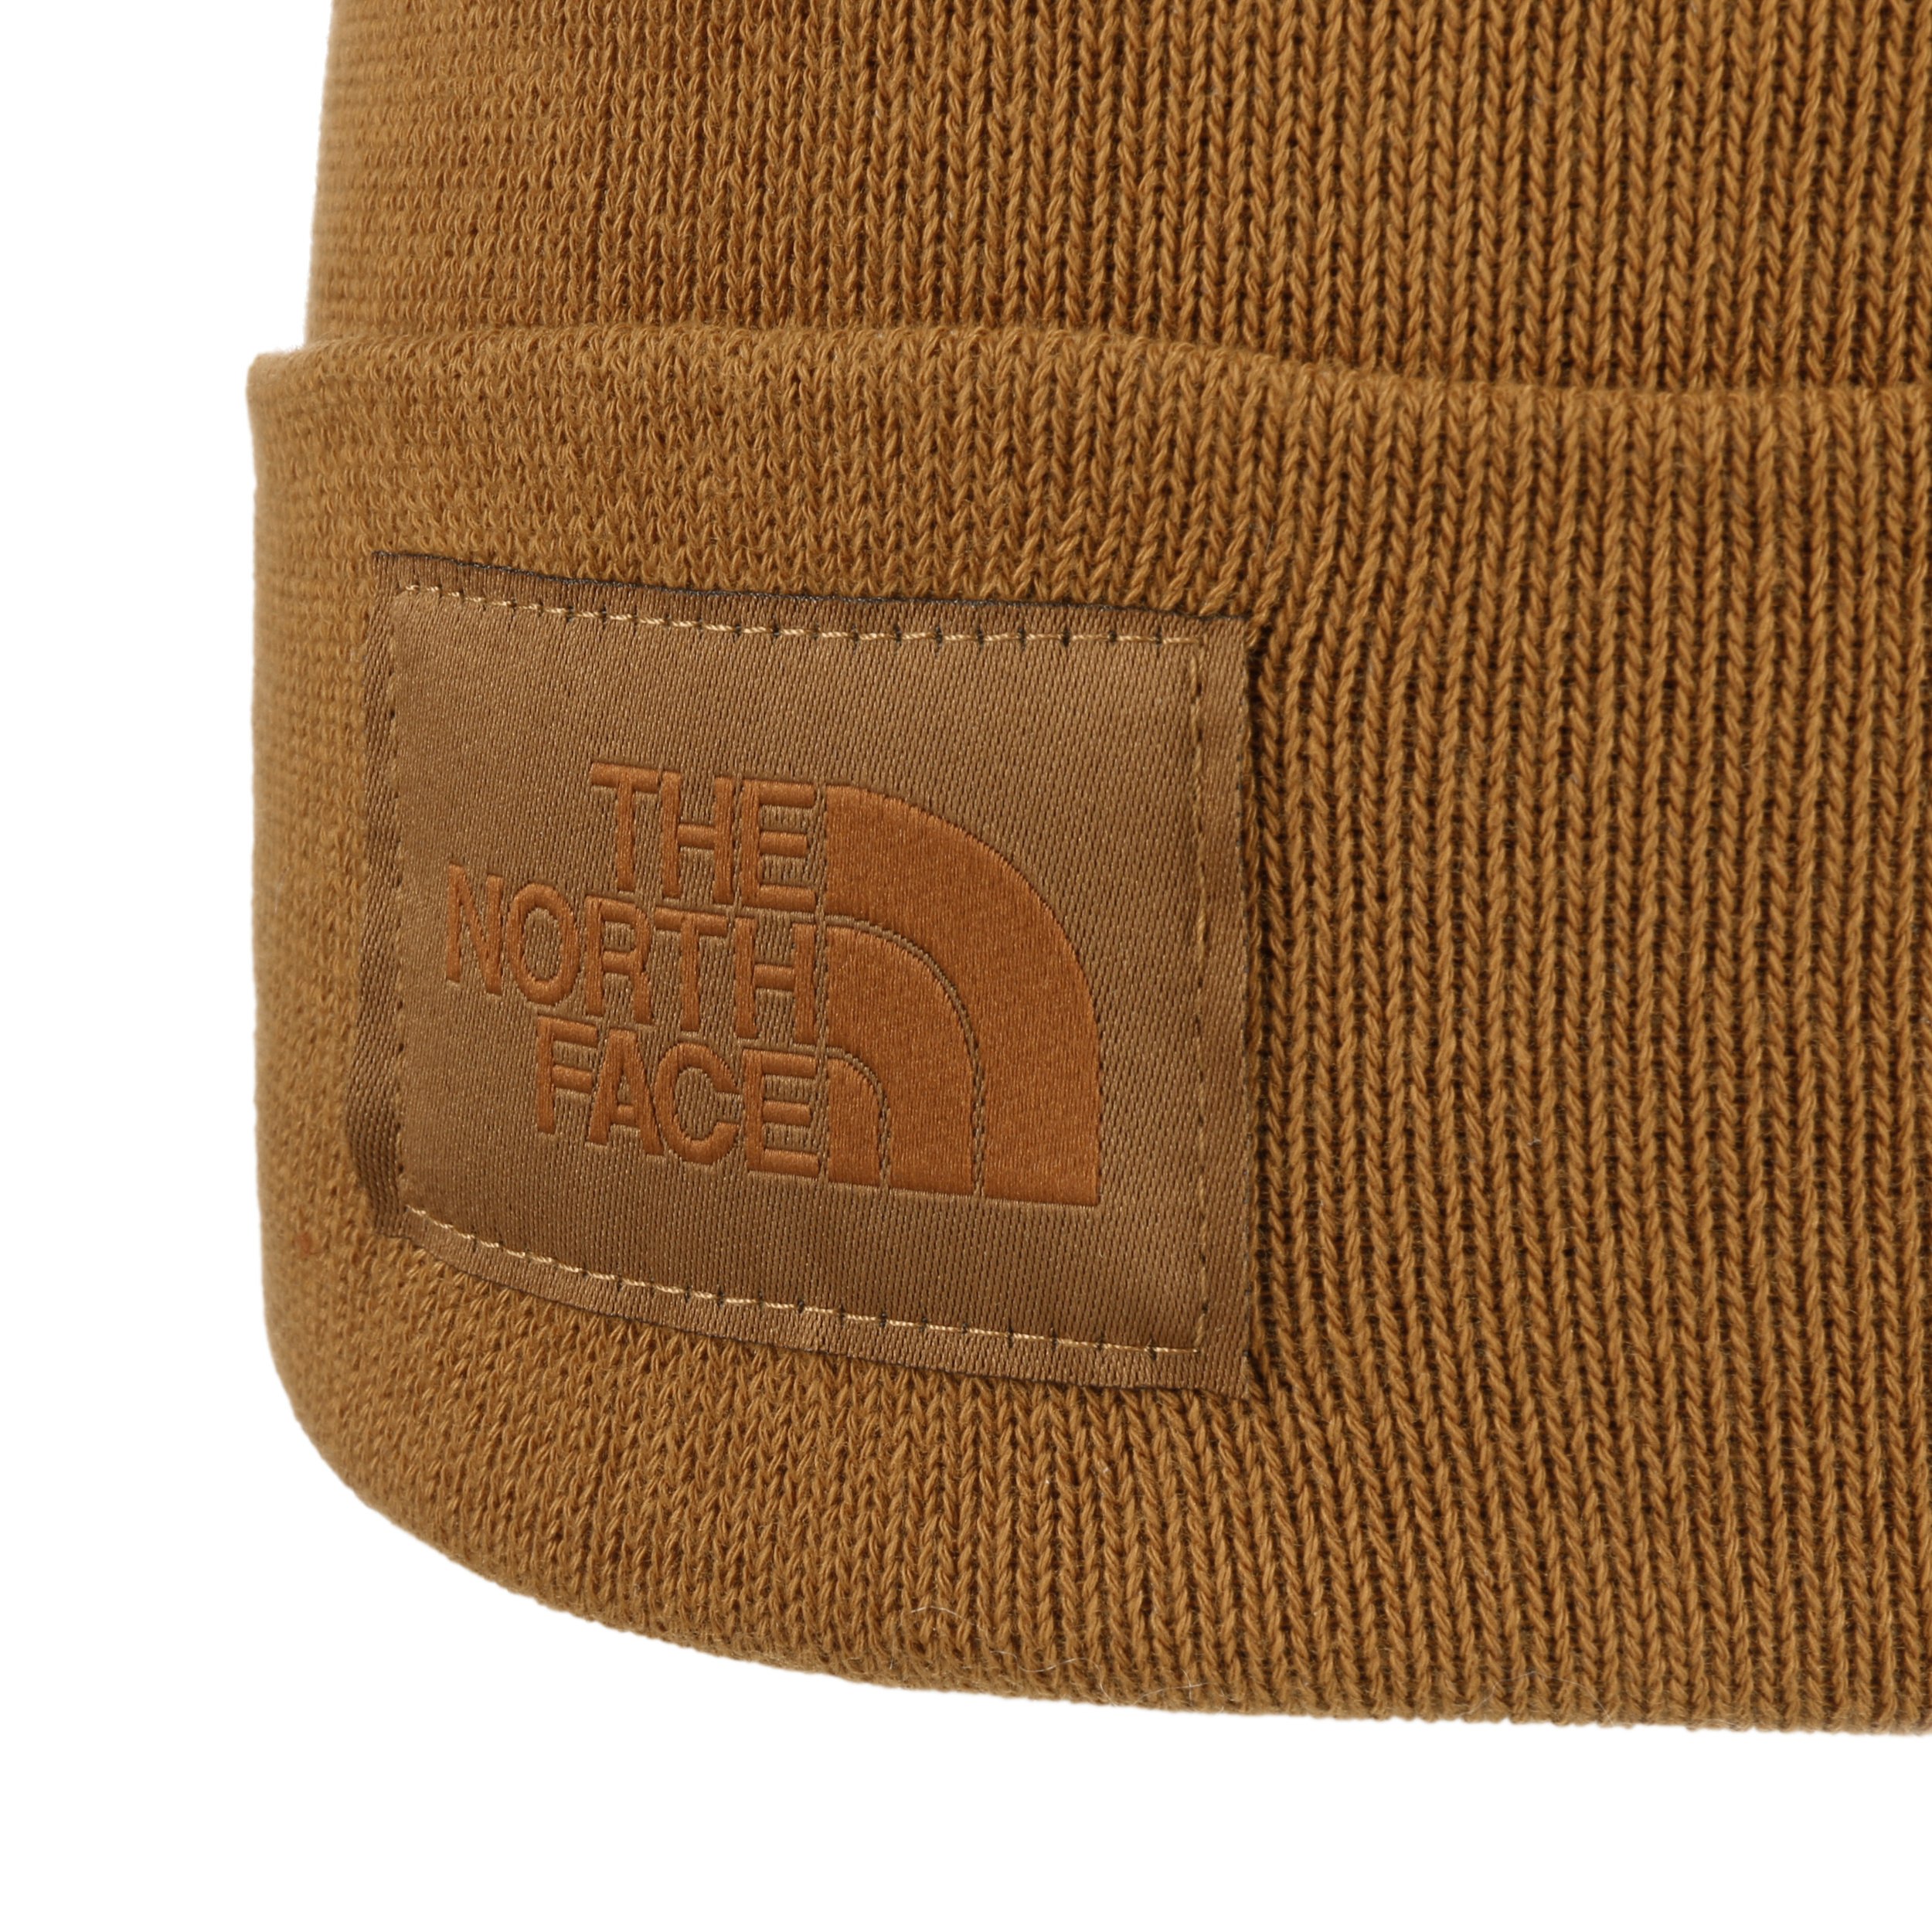 Bonnet Beanie Dock Recycle by The North Face - 29,95 €